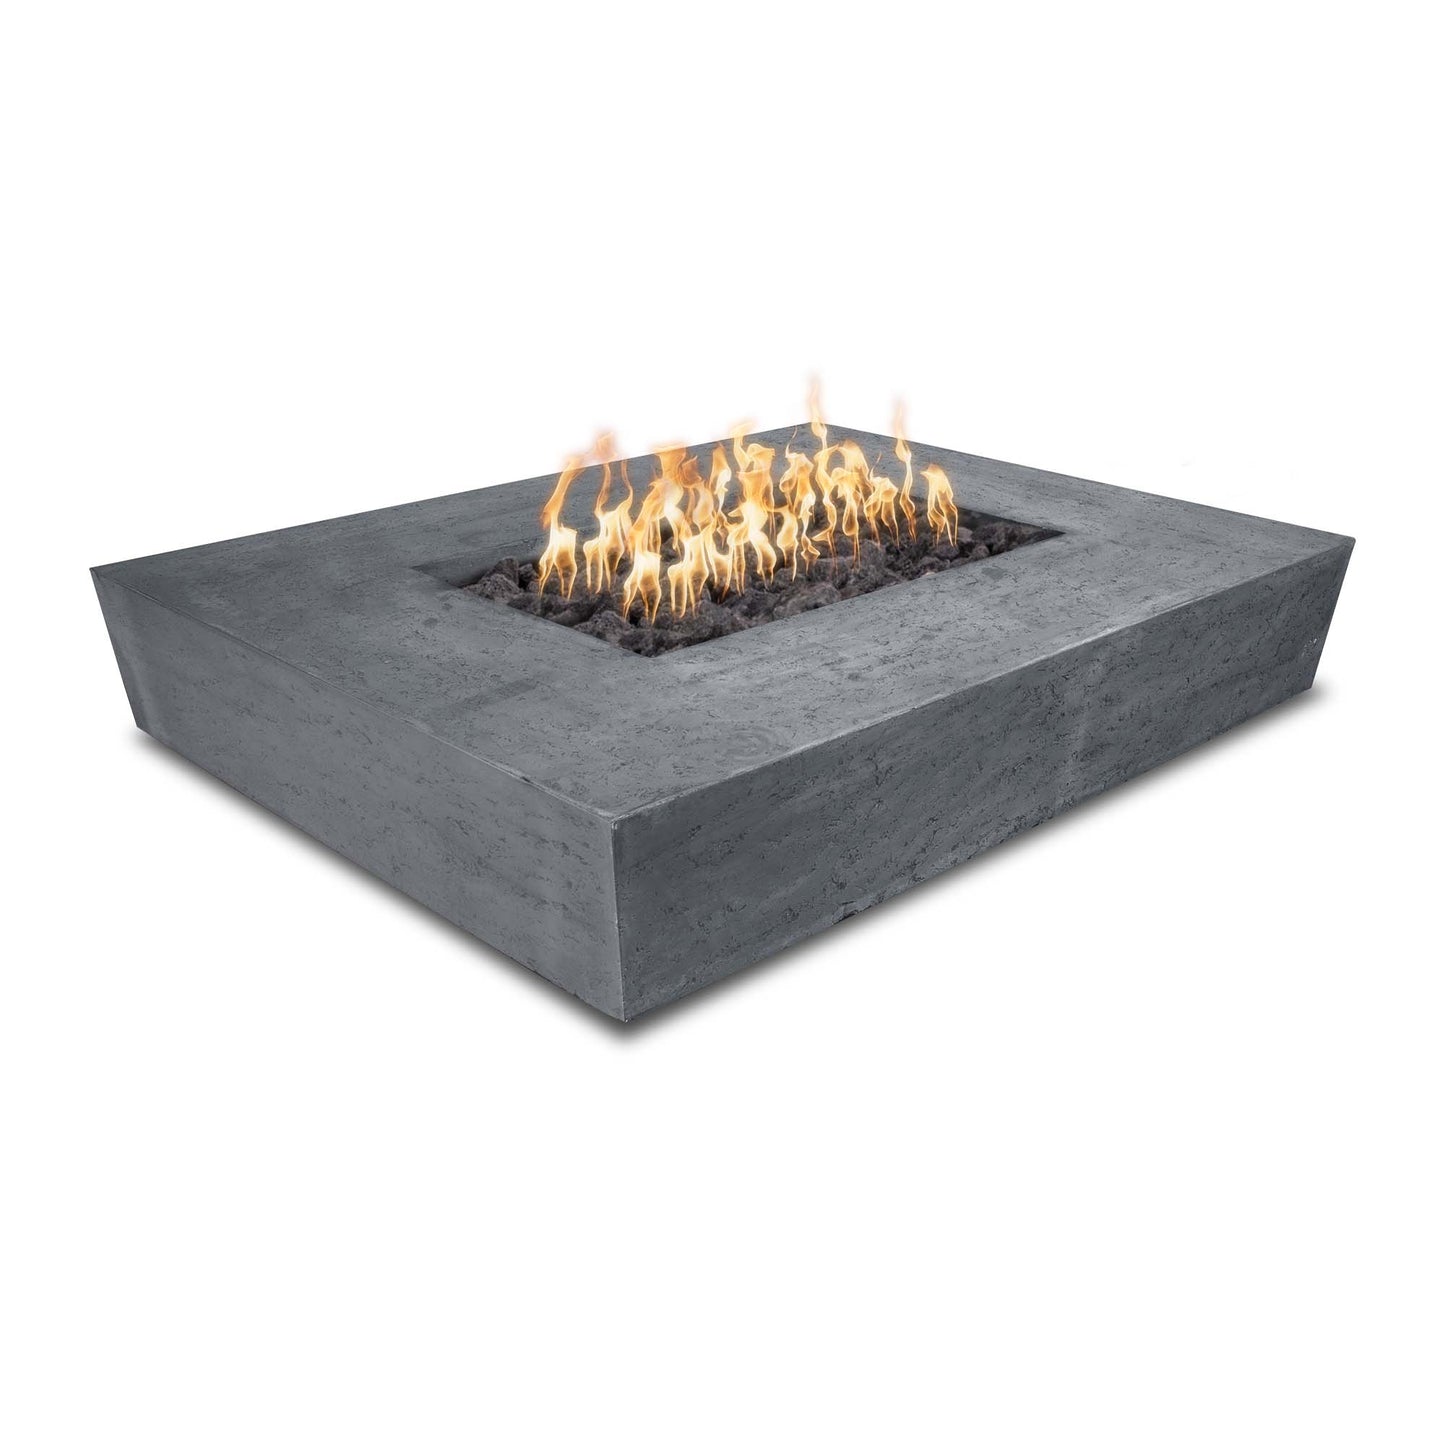 The Outdoor Plus Rectangular Heiko 58" Metallic Pearl GFRC Concrete Natural Gas Fire Pit with 110V Electronic Ignition